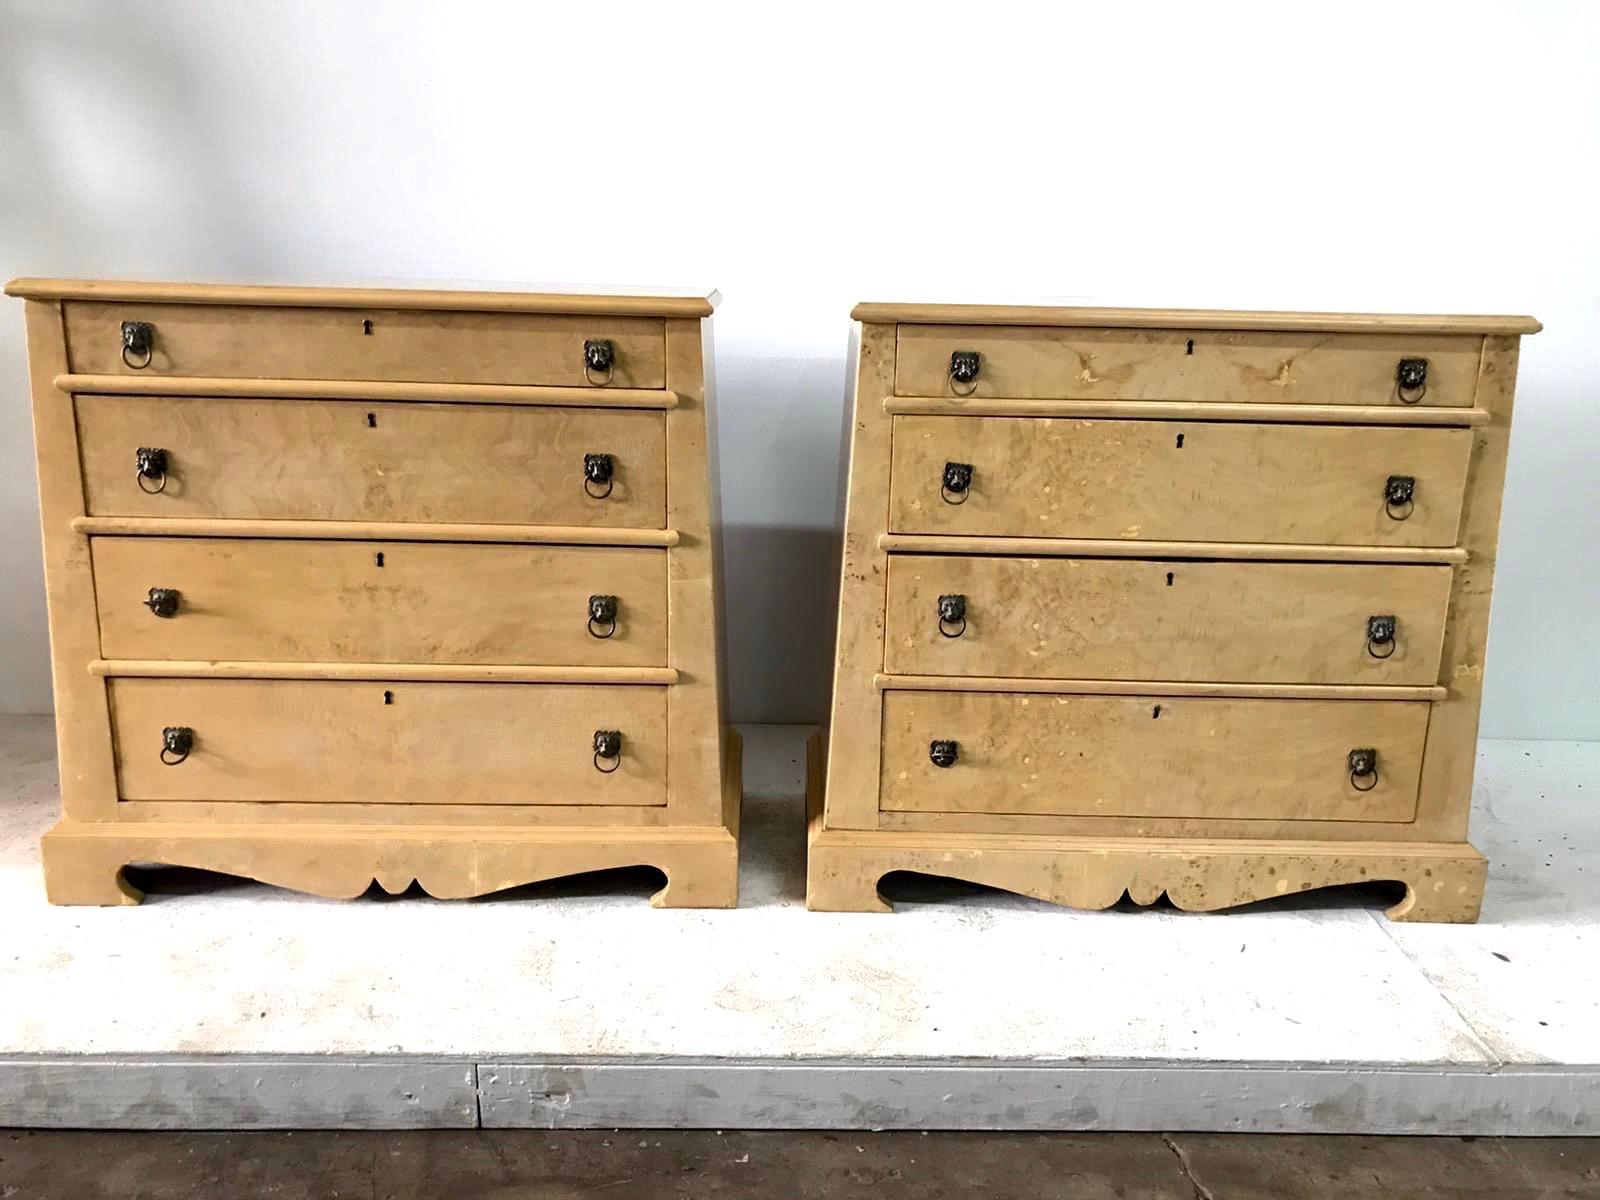 This important pair of trapezoid cabinets made of natural burled oak; comes from an L.A Hollywood estate. Branded with manufacturer's mark, Quigley. Likely a design by Samuel Marx. Four drawers each with lion head bronze pulls and key holes (missing